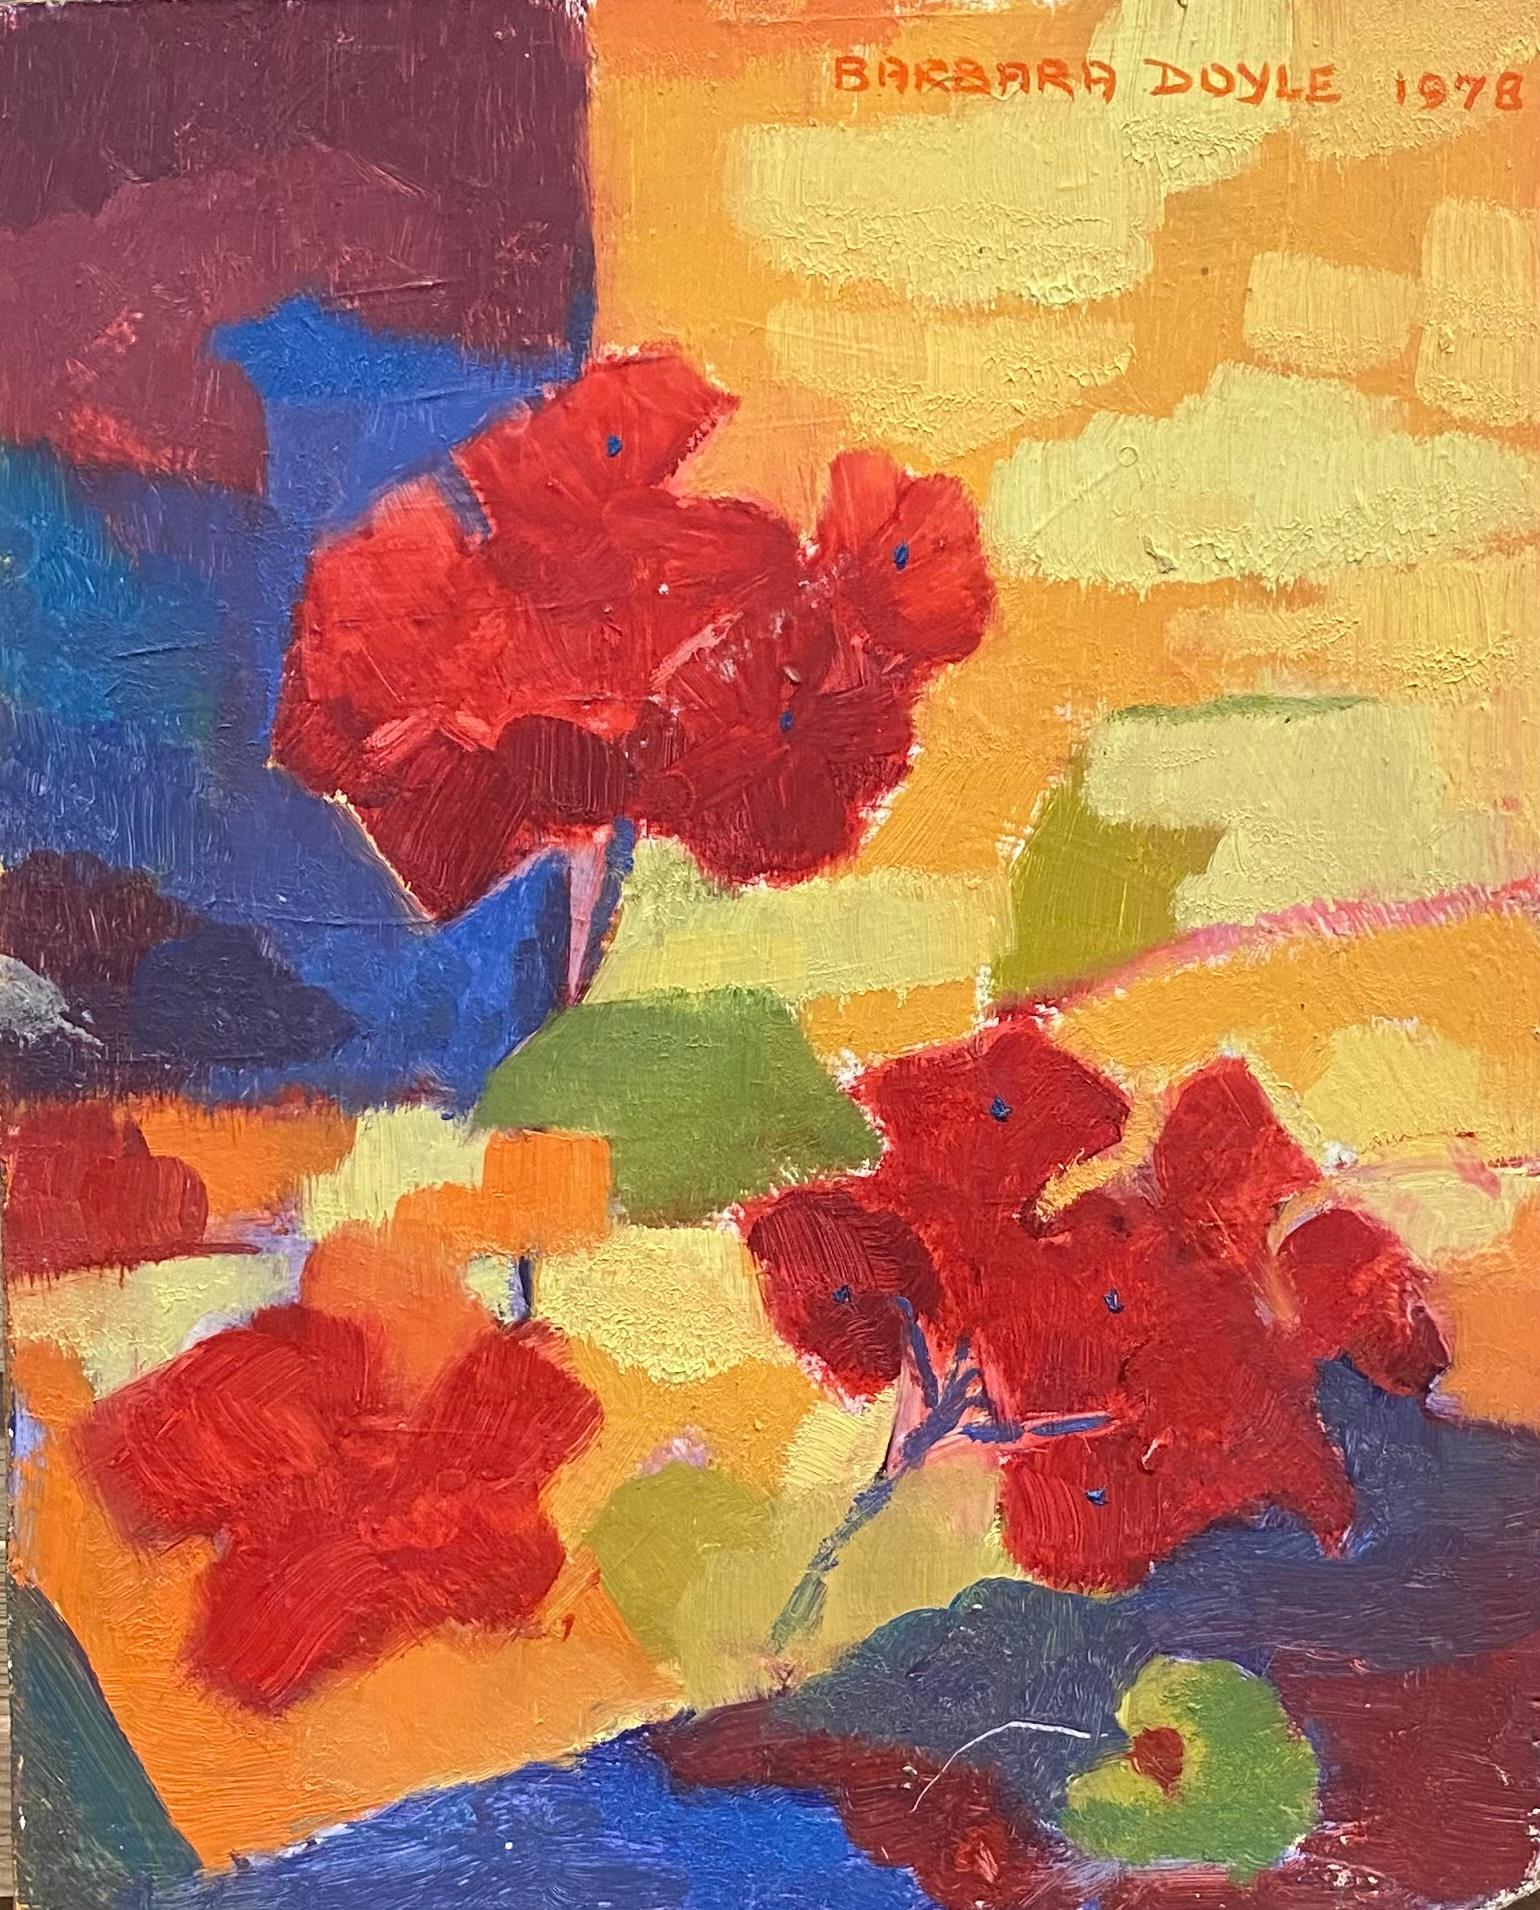 Barbera Doyle Abstract Painting - BARBARA DOYLE  1970's MODERN OIL PAINTING - Vibrant Colour Floral Abstract